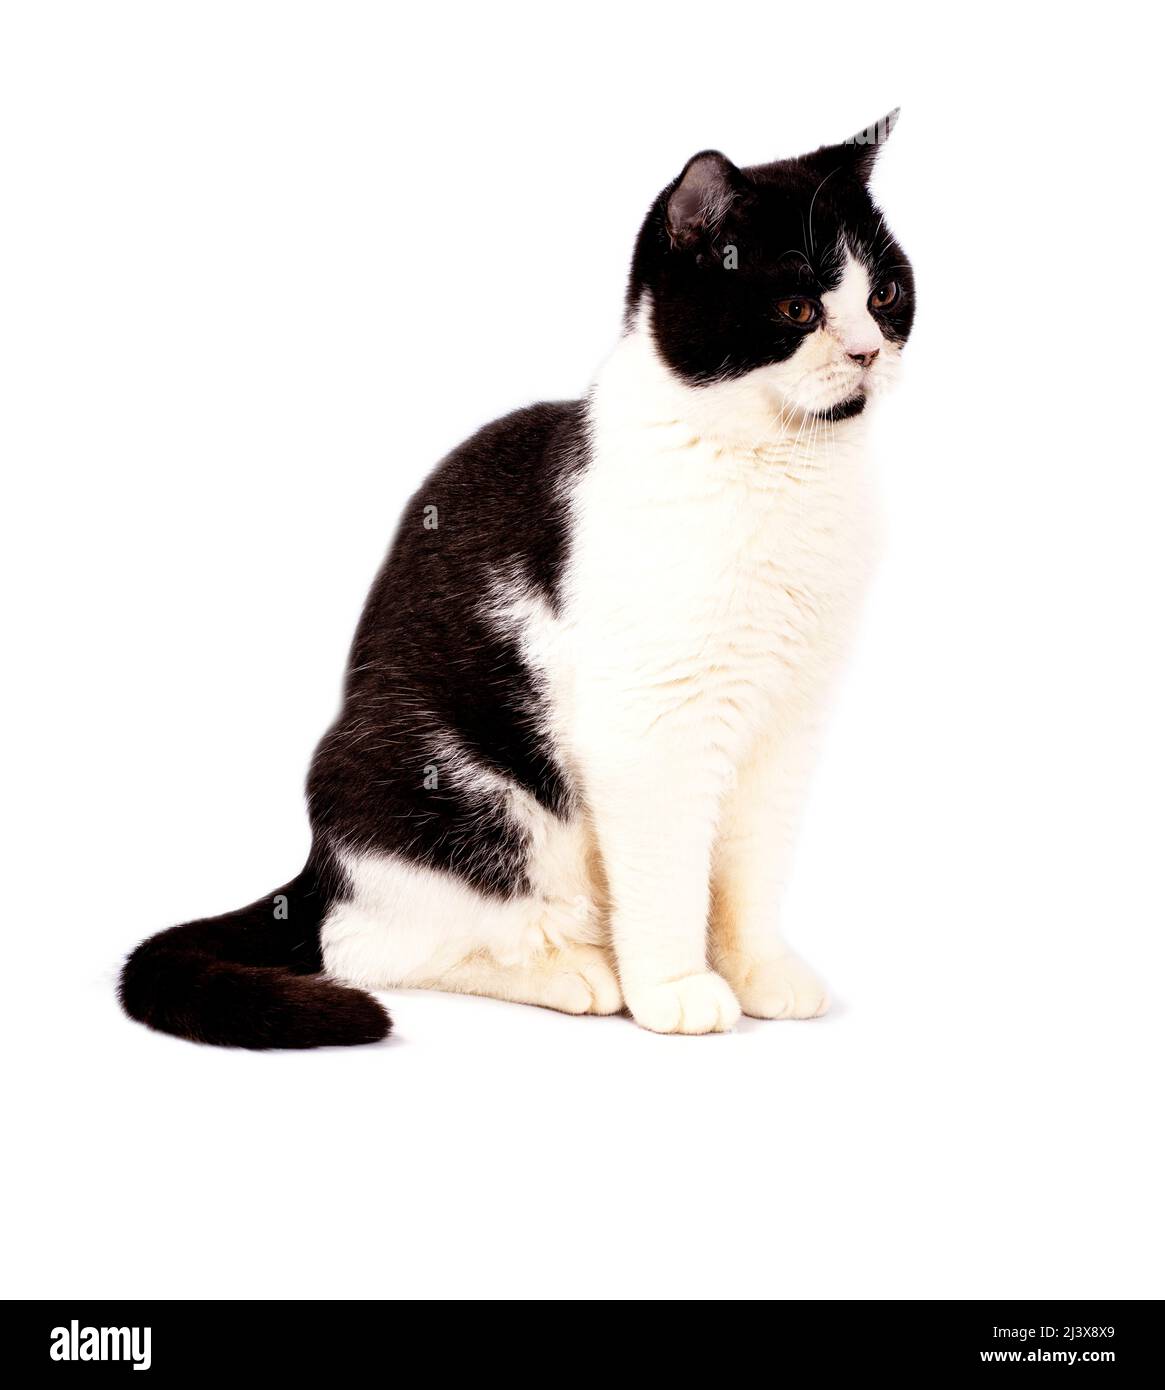 big scottish cat black bicolor color on a white background, isolated image, beautiful domestic cats, pets, Stock Photo